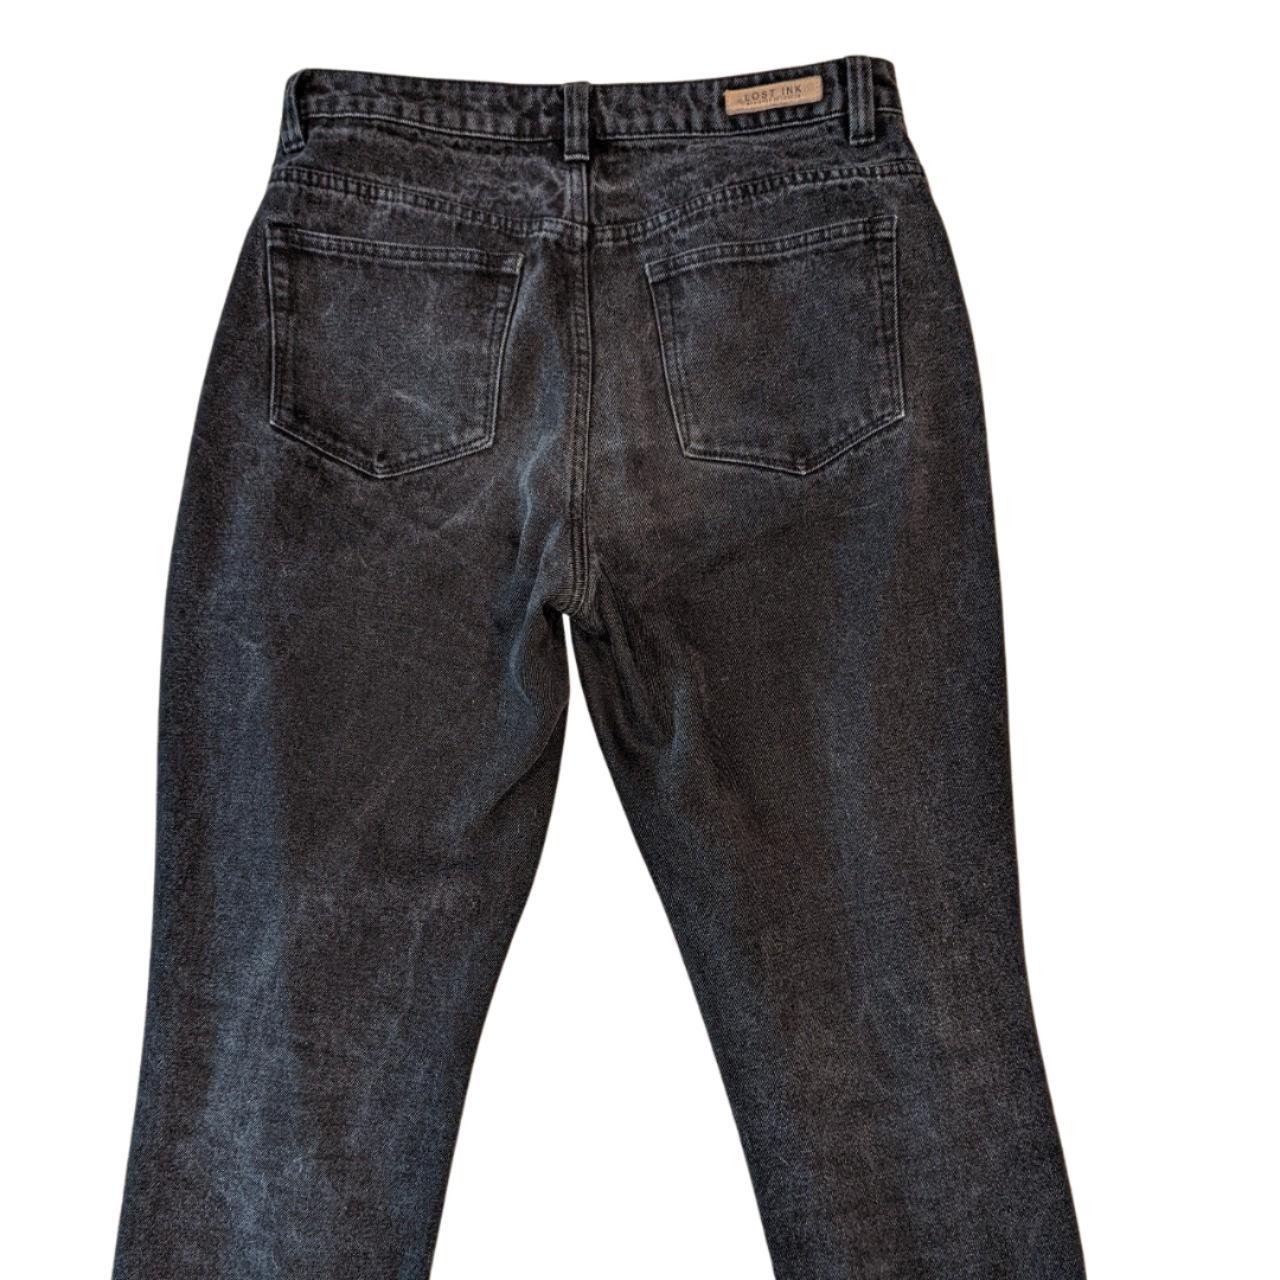 Product Image 4 - LOST INK
- hi-rise mom jeans